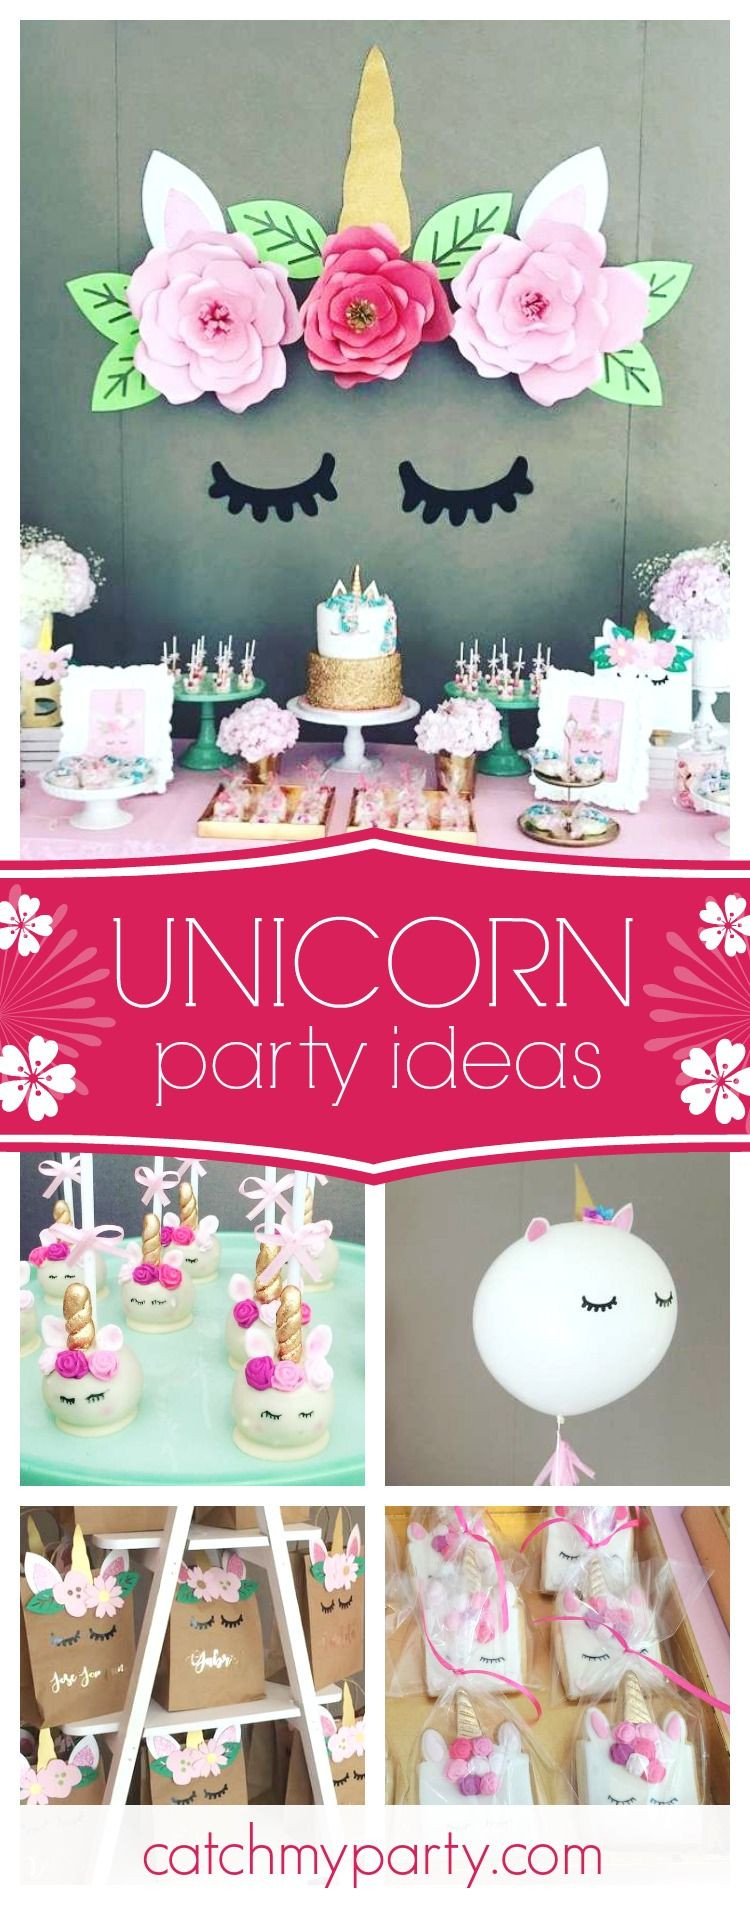 Ideas For A Unicorn Child'S Birthday Party
 Unicorn Birthday "Unicorn Magical Party"